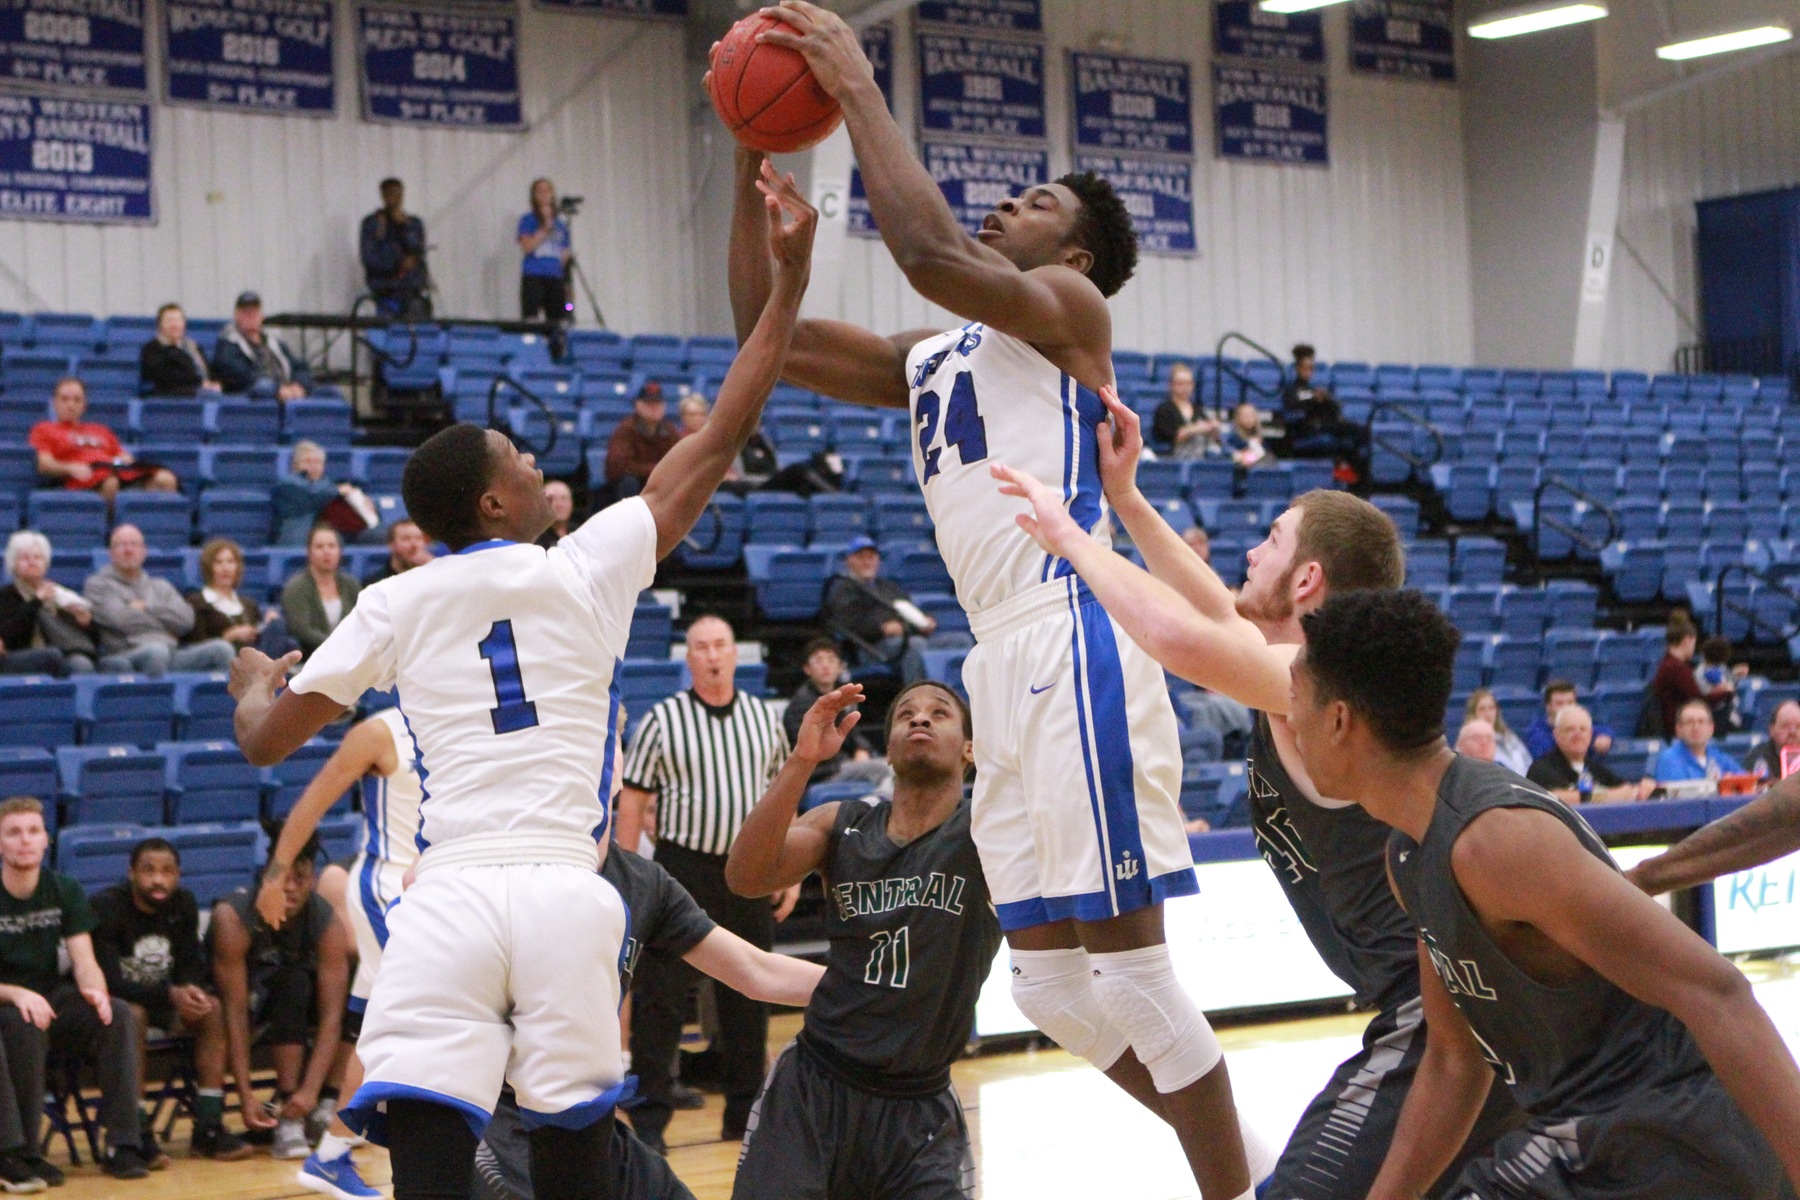 Emmanuel Ugboh and his "new" Iowa Western teammates rolled to a 100-76 victory over NIACC Tuesday evening (11/6/18) at Reiver Arena.